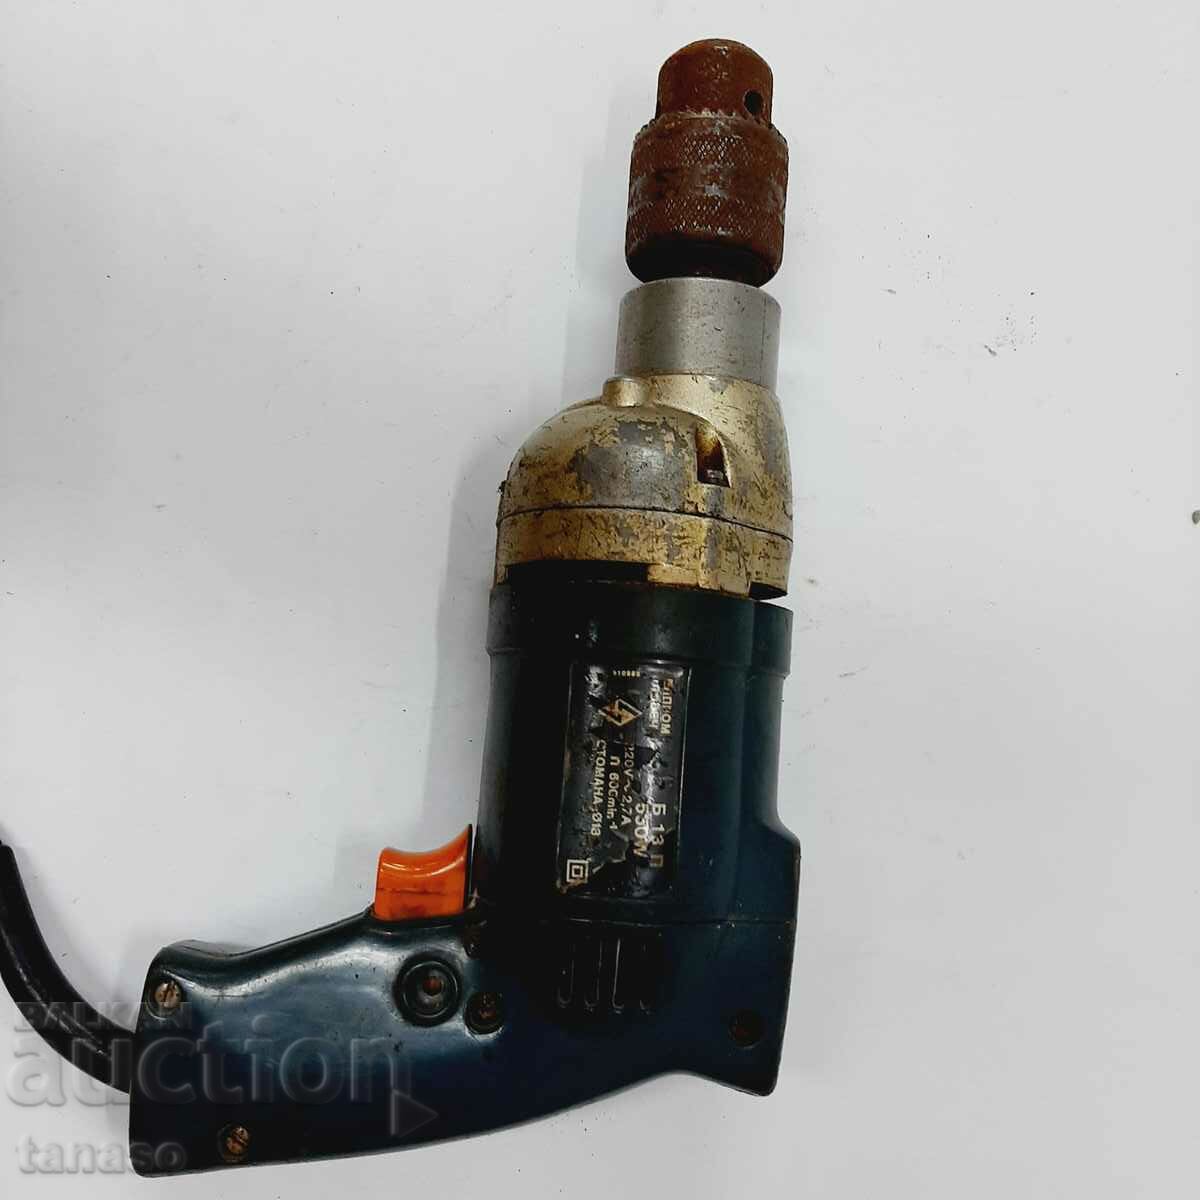 Electric drill "Elprom Lovech" (7.6)